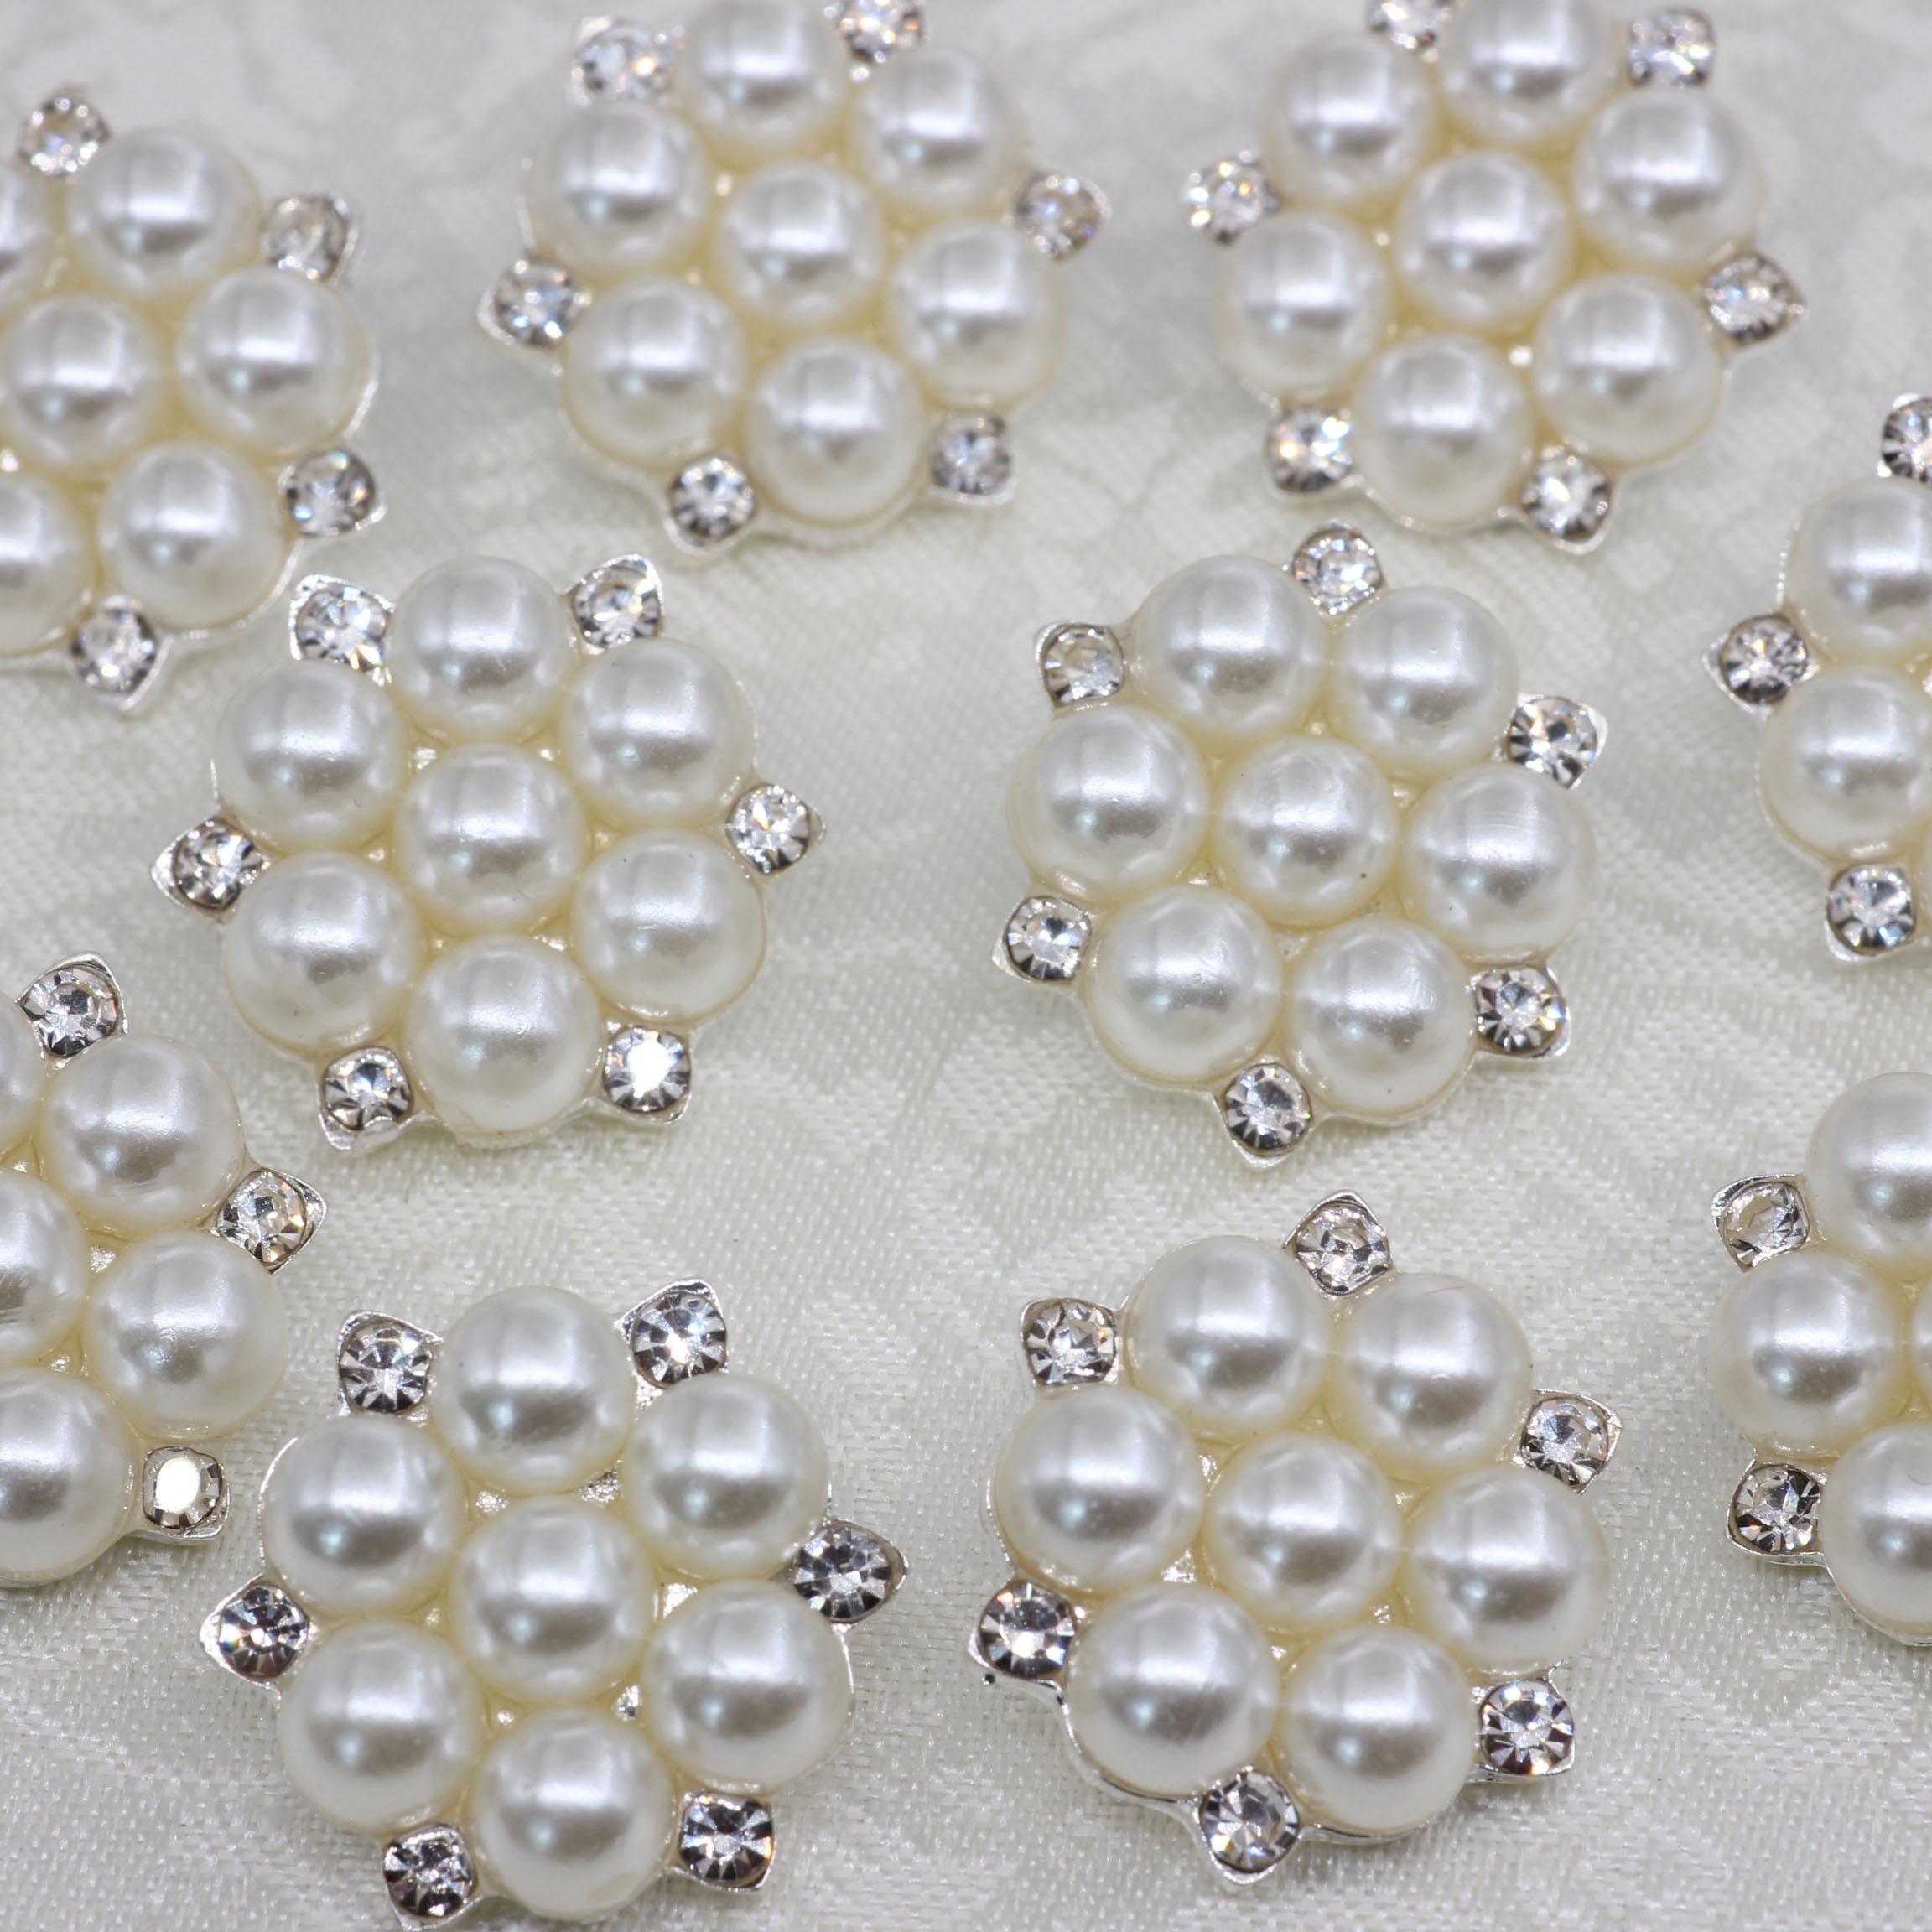 22PCS Pearl Rhinestone Button Rhinestone Faux Pearl Decoration Pearl Brooch  Alloy Flower Pendant For Jewelry Making Clothes Bag Shoes Supplies And Wed